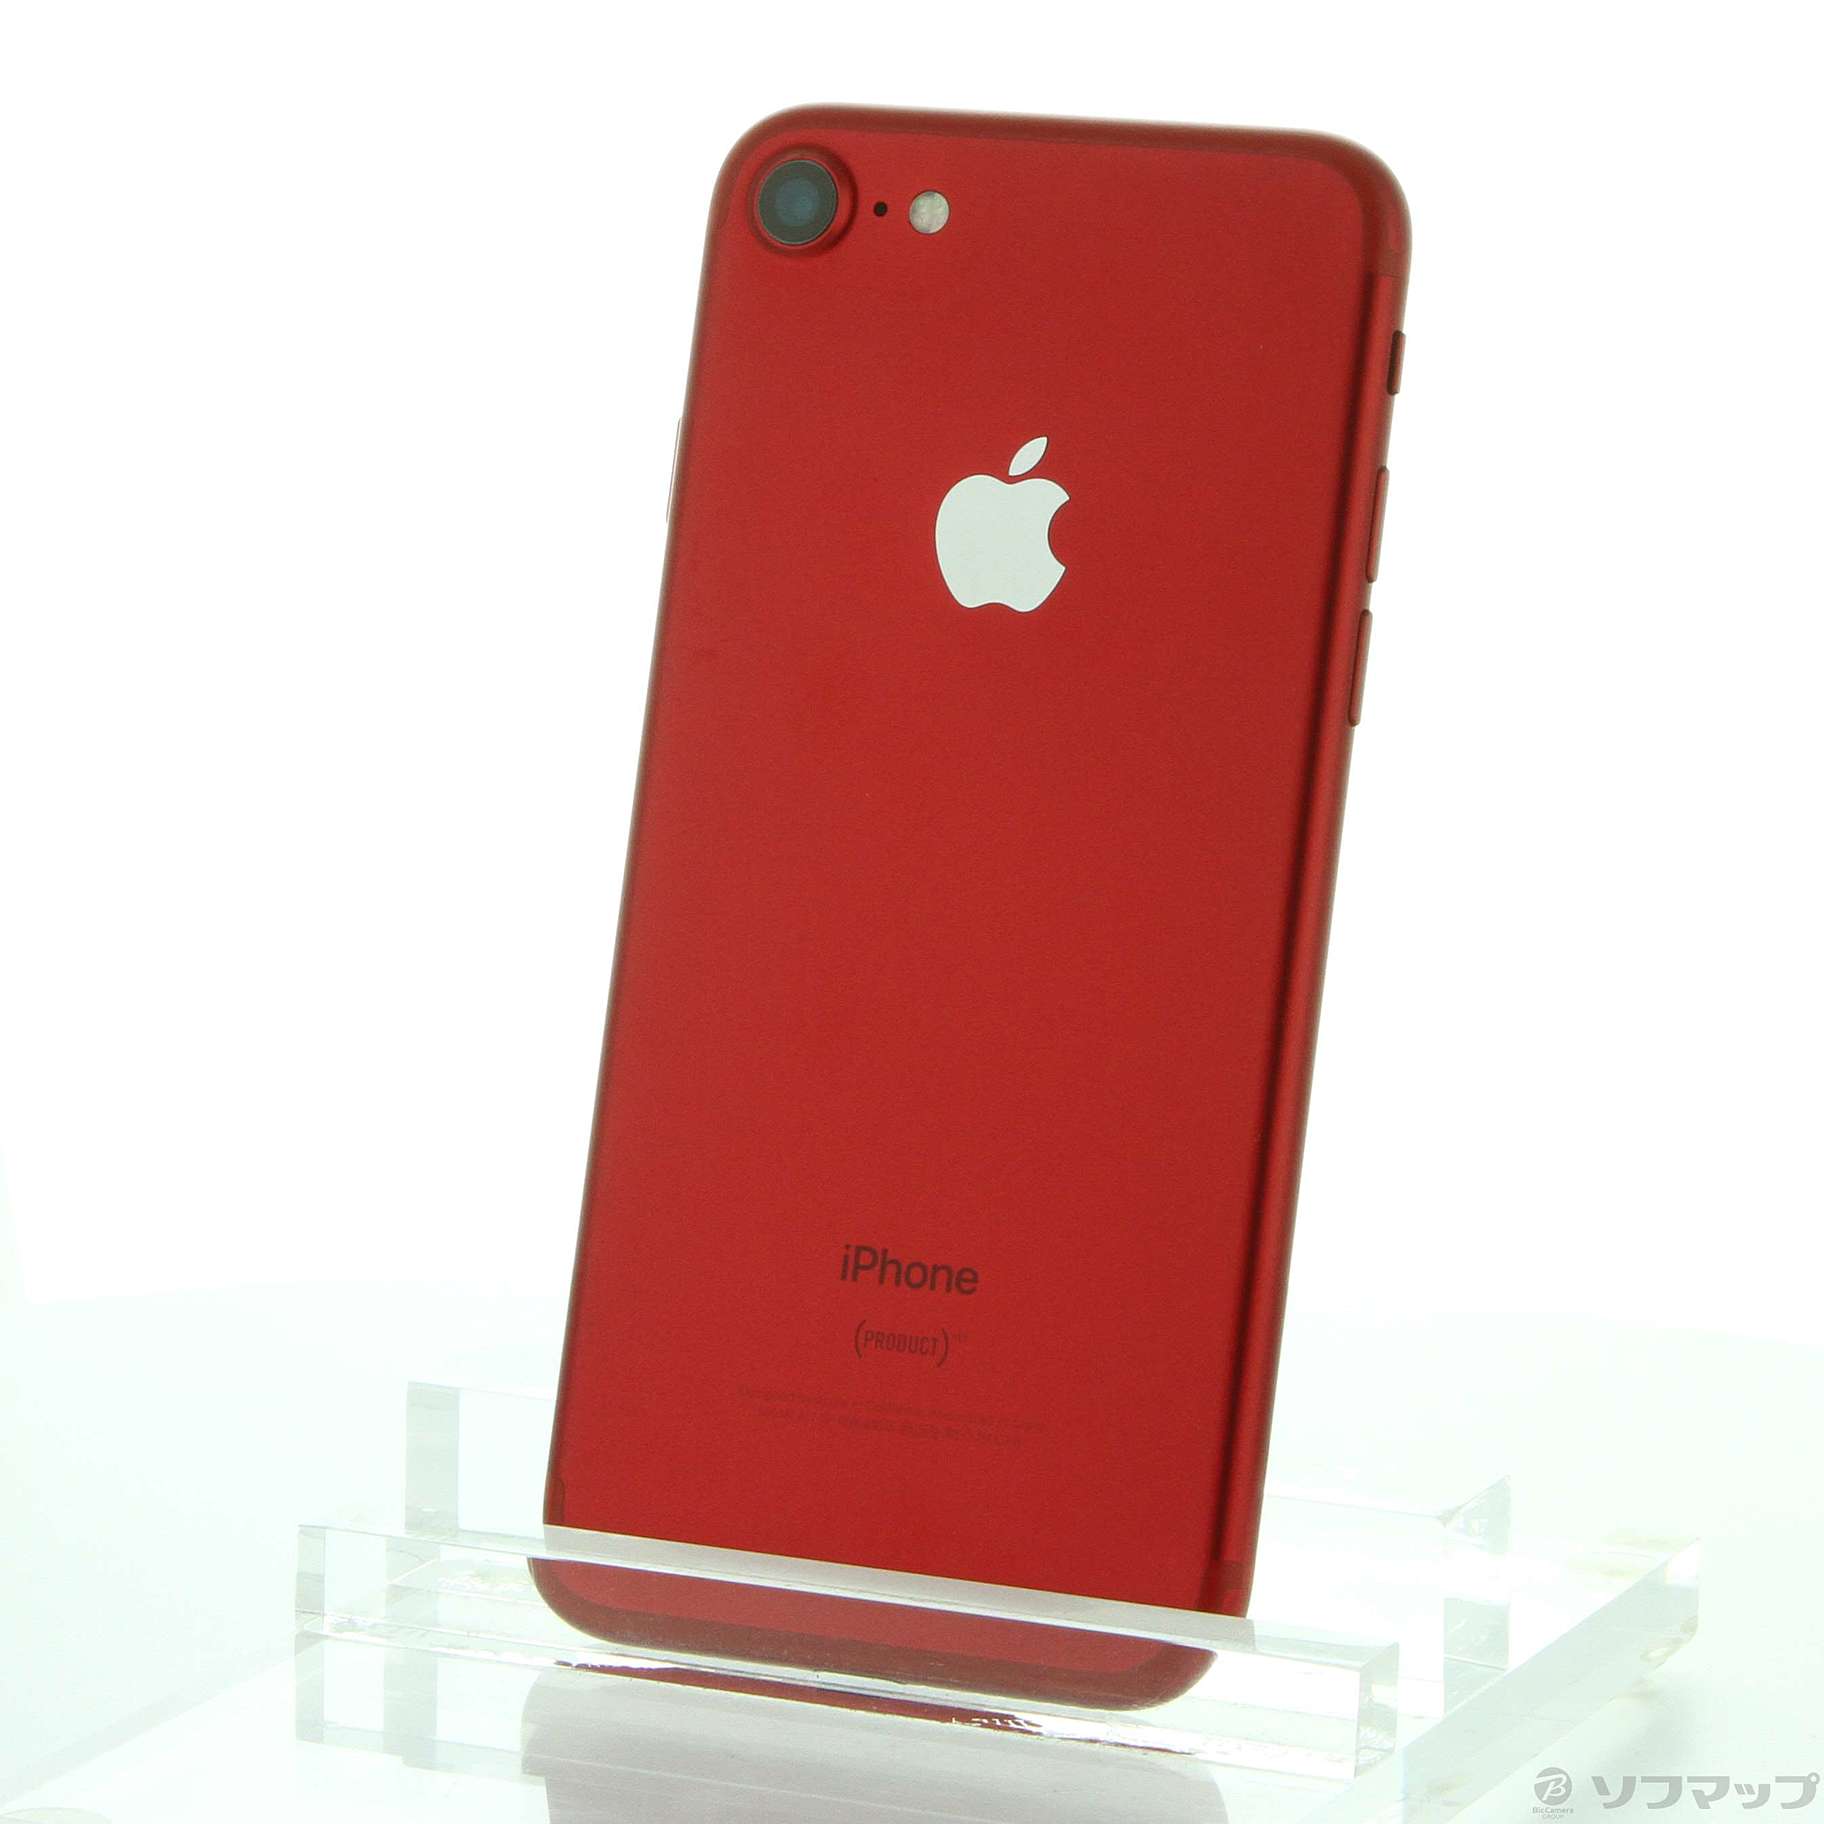 iPhone7 128GB MPRX2J/A シムフリー RED